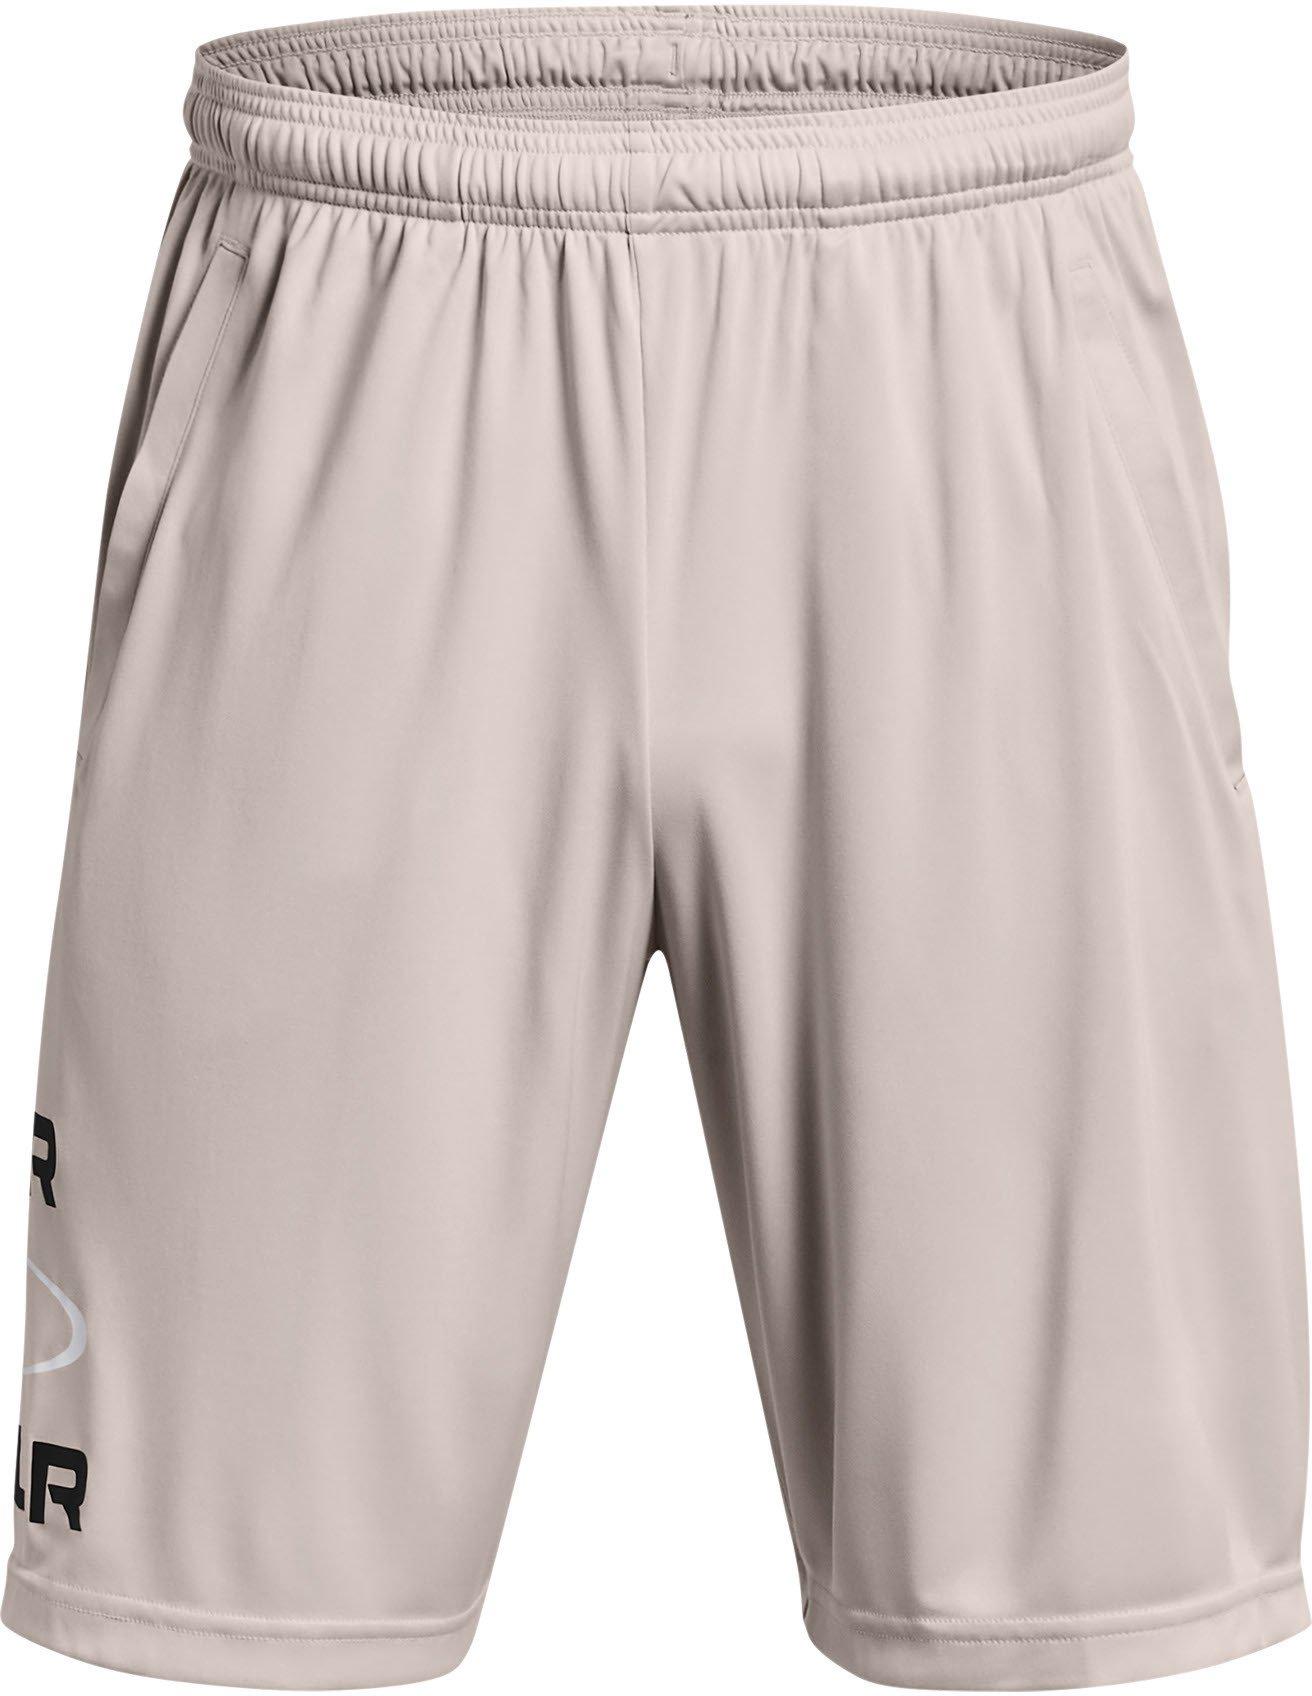 Under Armour Tech WM Graphic Shorts-GRY S